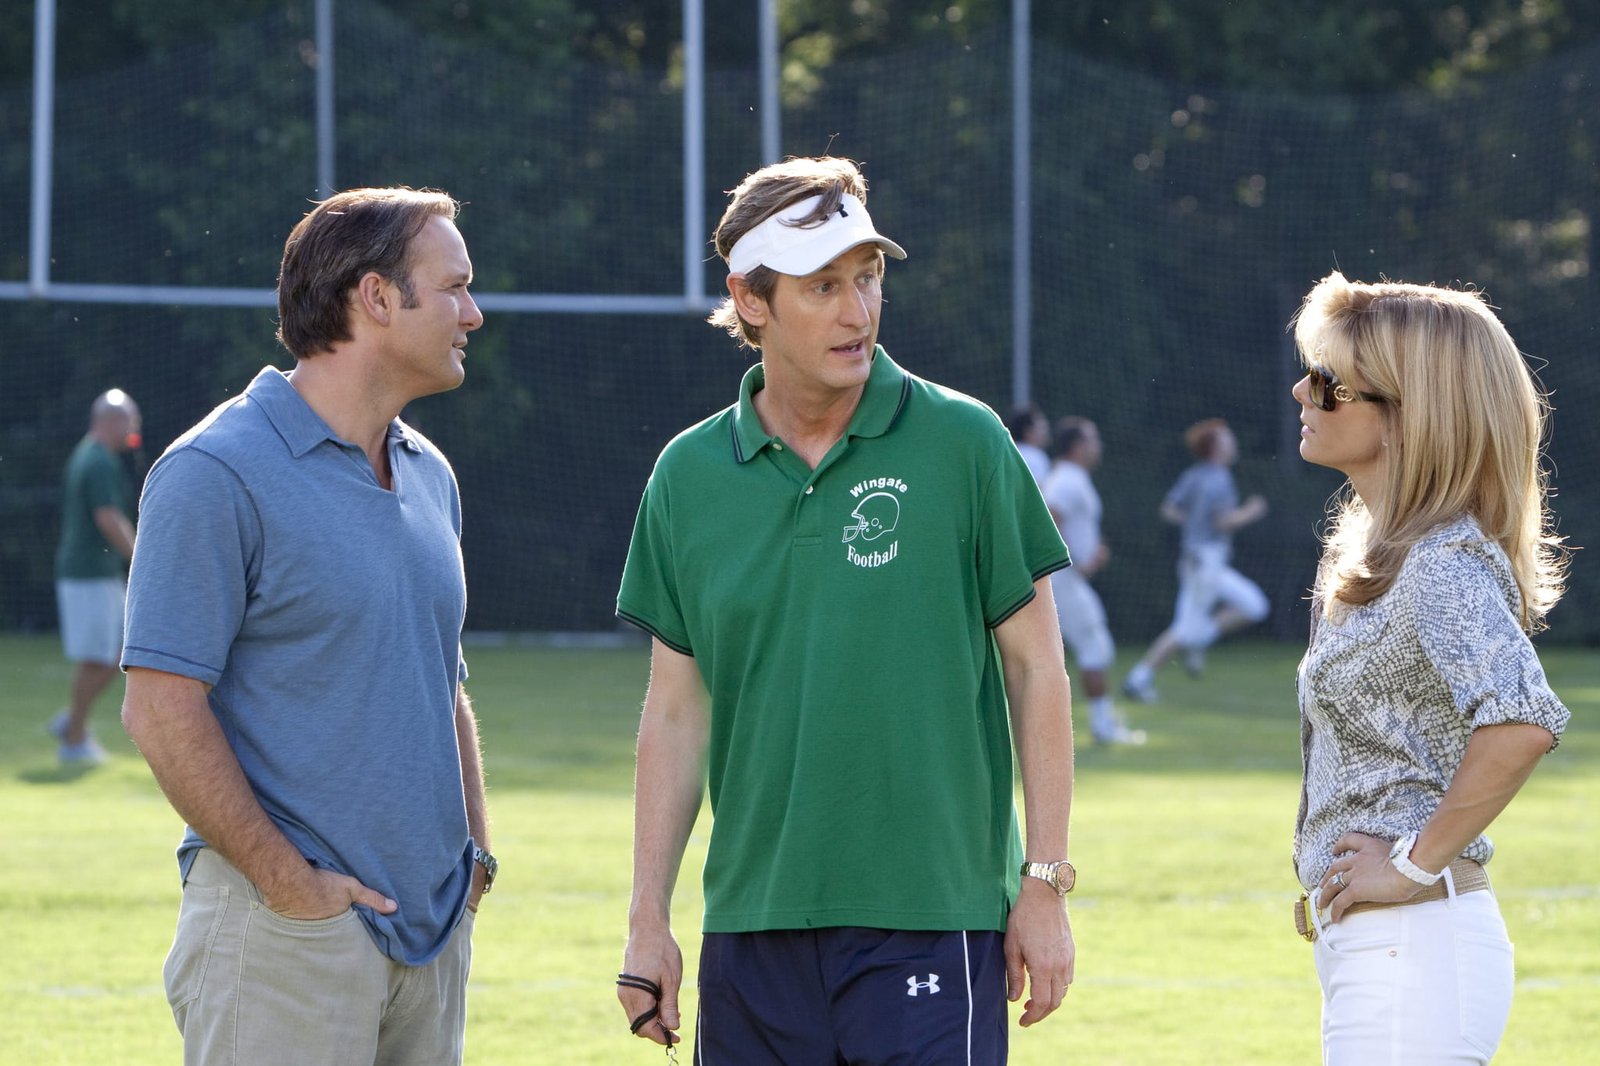 Tim McGraw, Ray McKinnon, and Sandra Bullock in The Blind Side (2009)